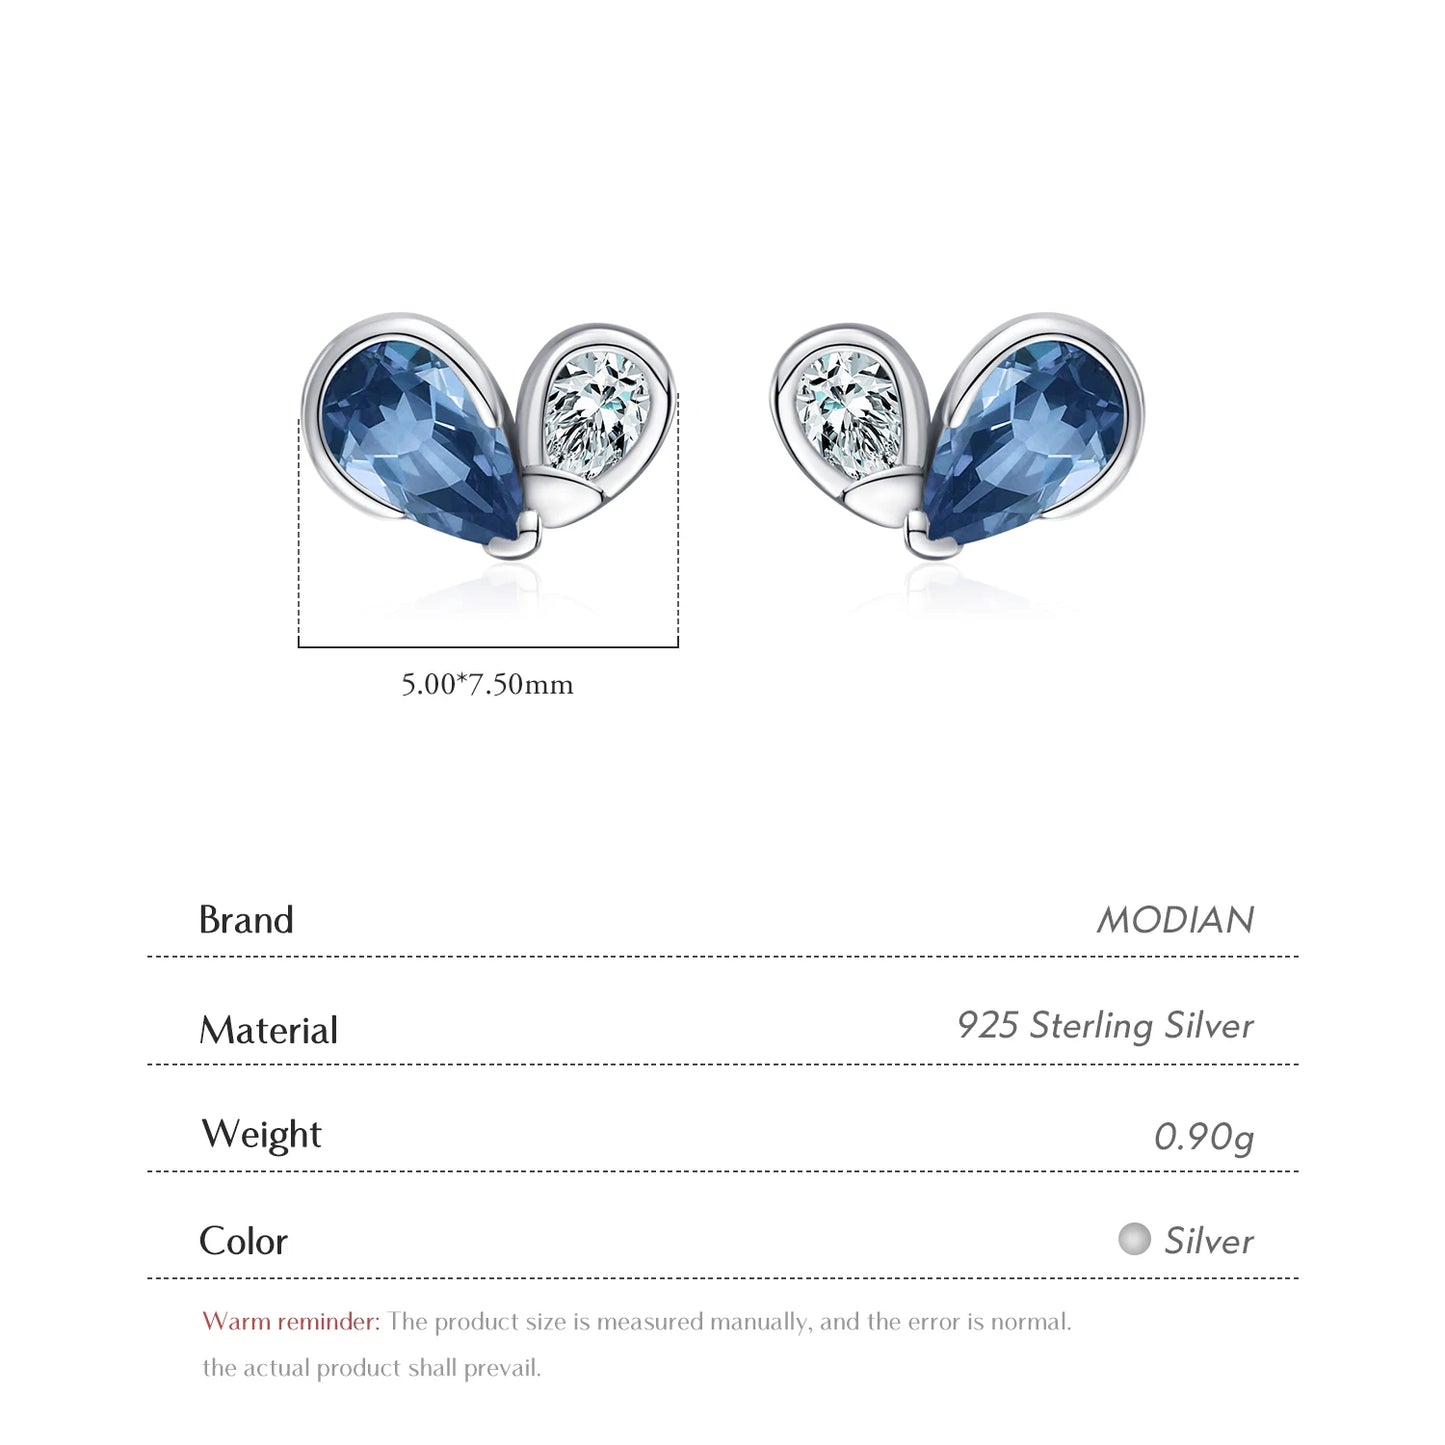 Stunning MQ 925 Silver Heart Earrings - Perfect for Women's Fine Jewelry Collection!